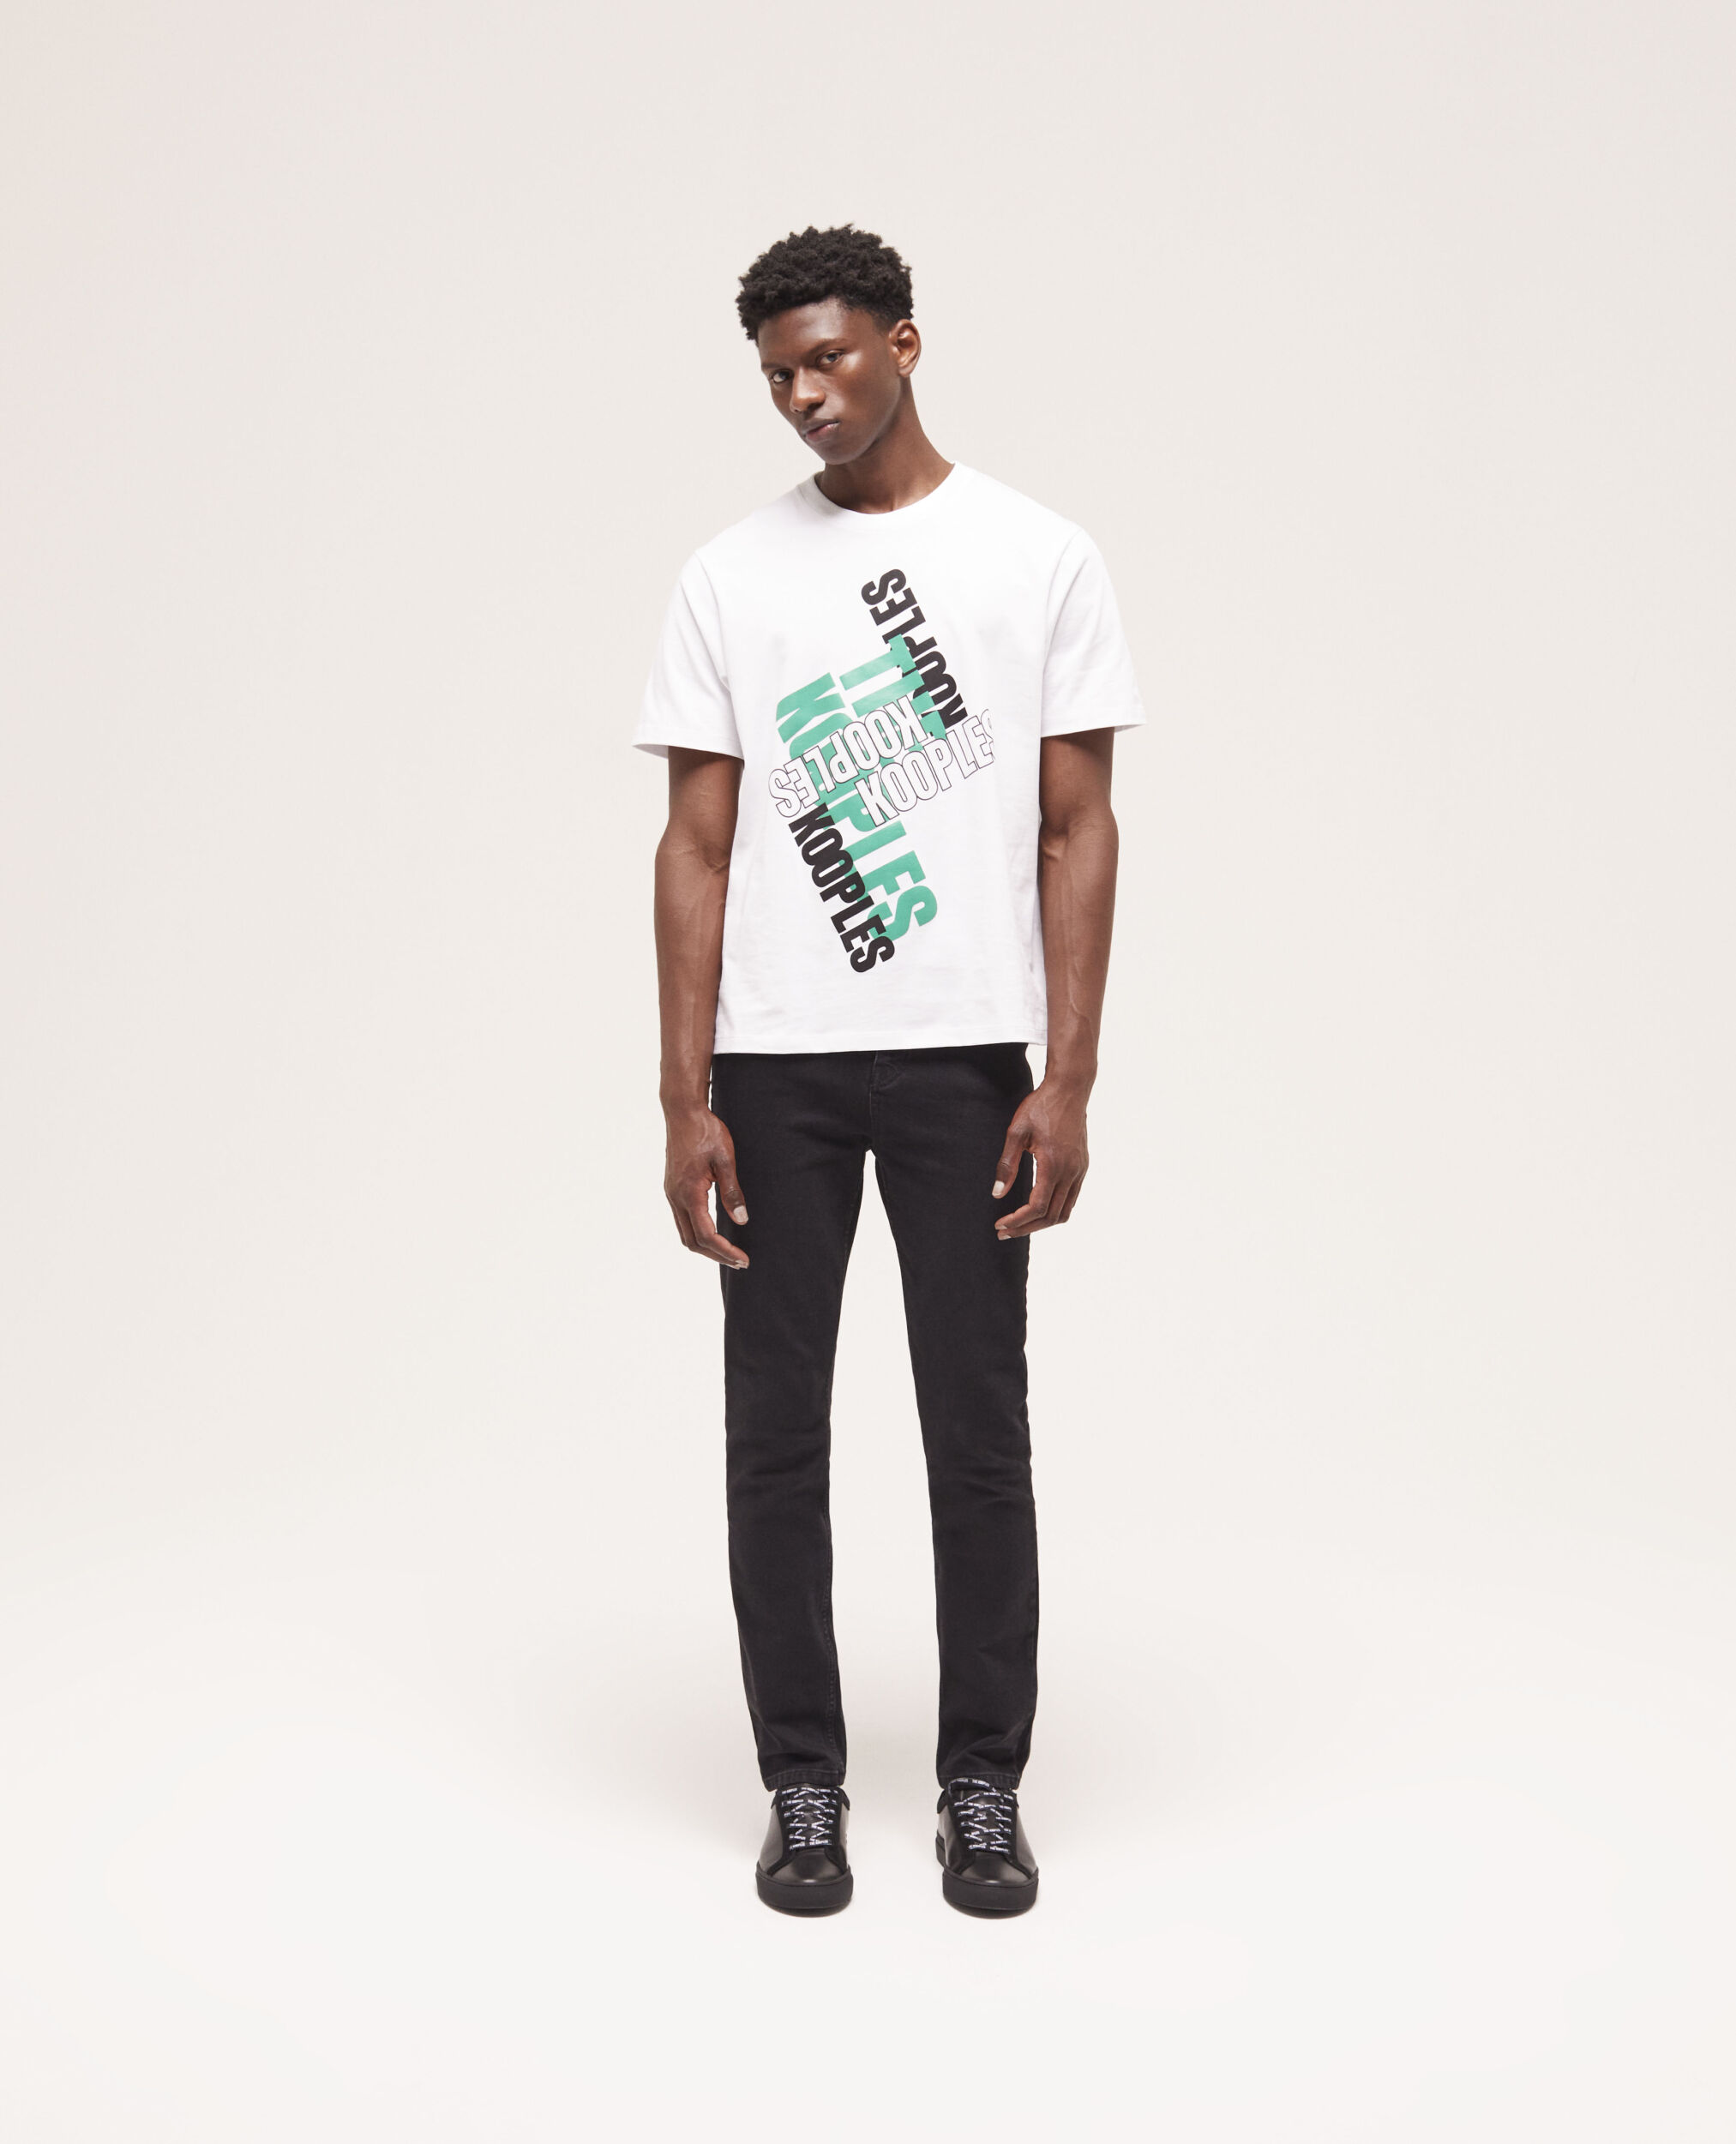 T-shirt Homme logo The Kooples blanc, GREEN-WHITE, hi-res image number null